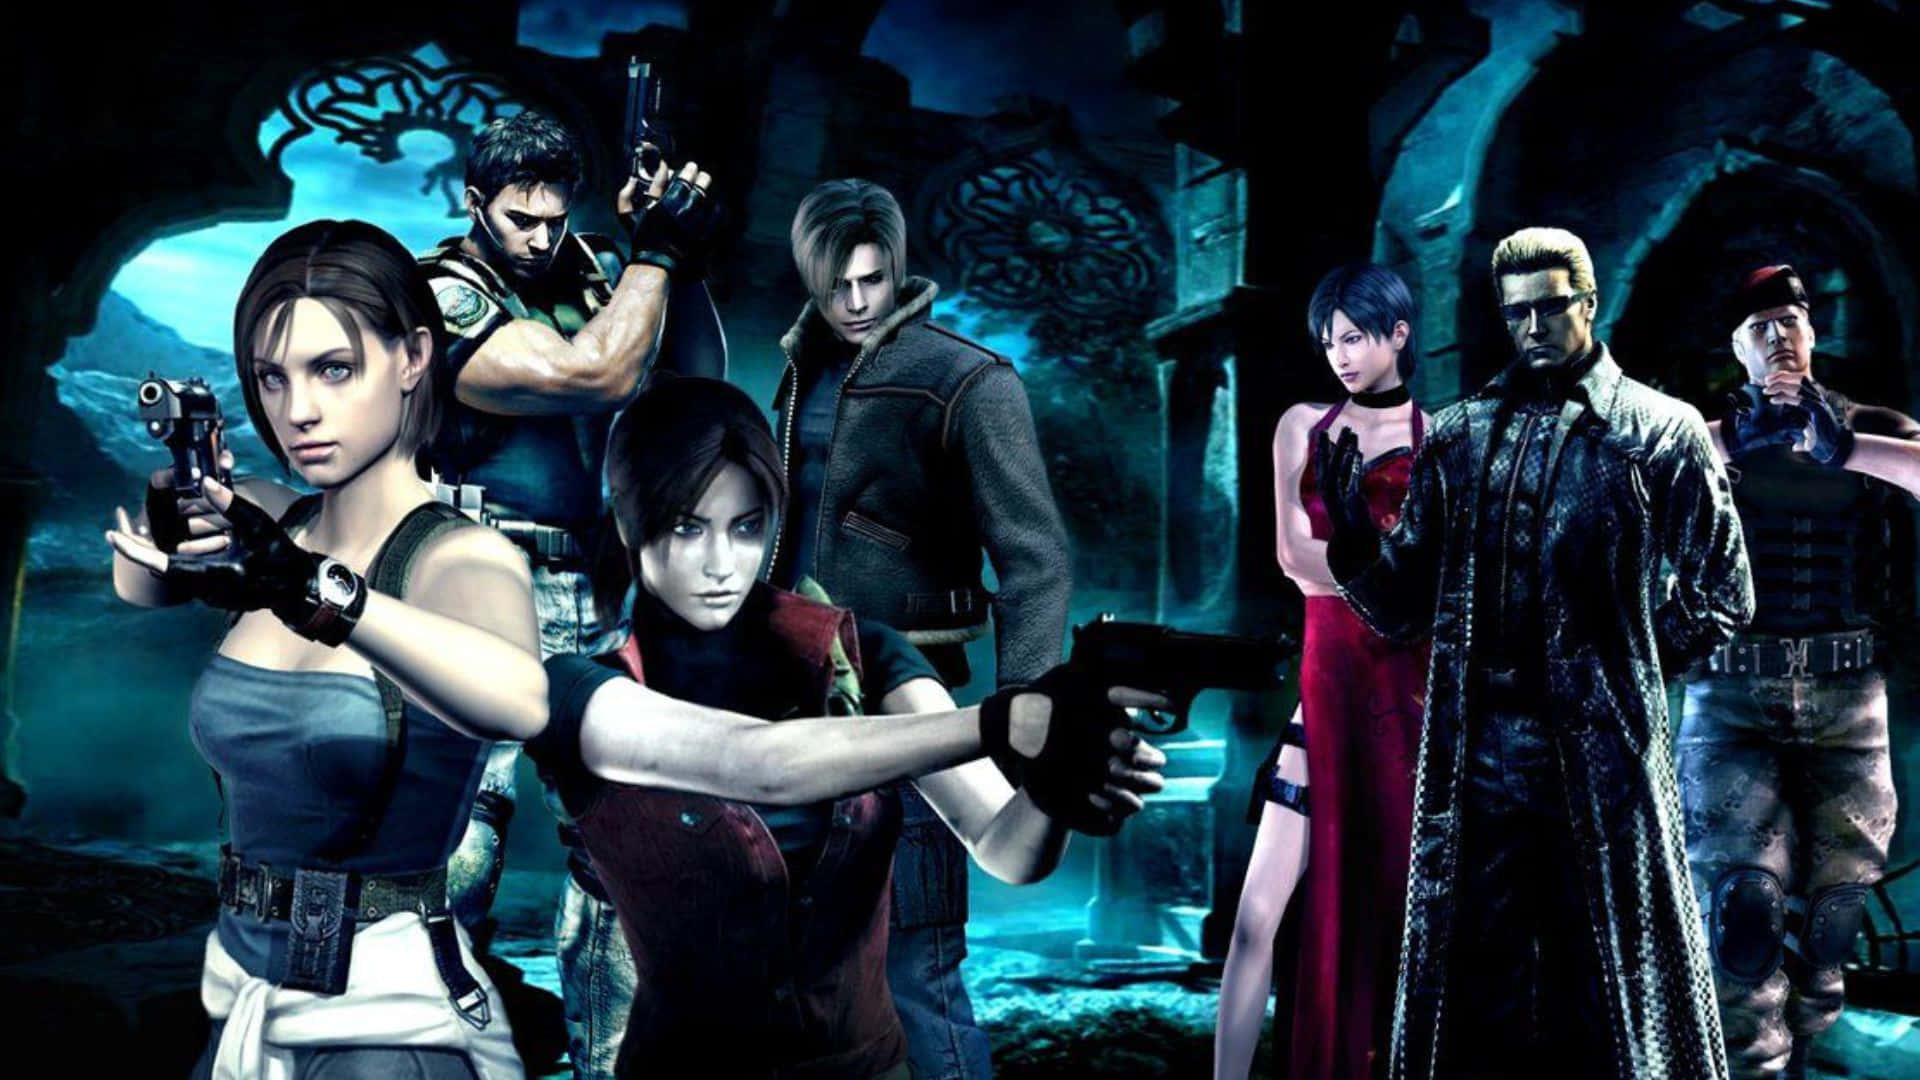 100+] Resident Evil Characters Wallpapers